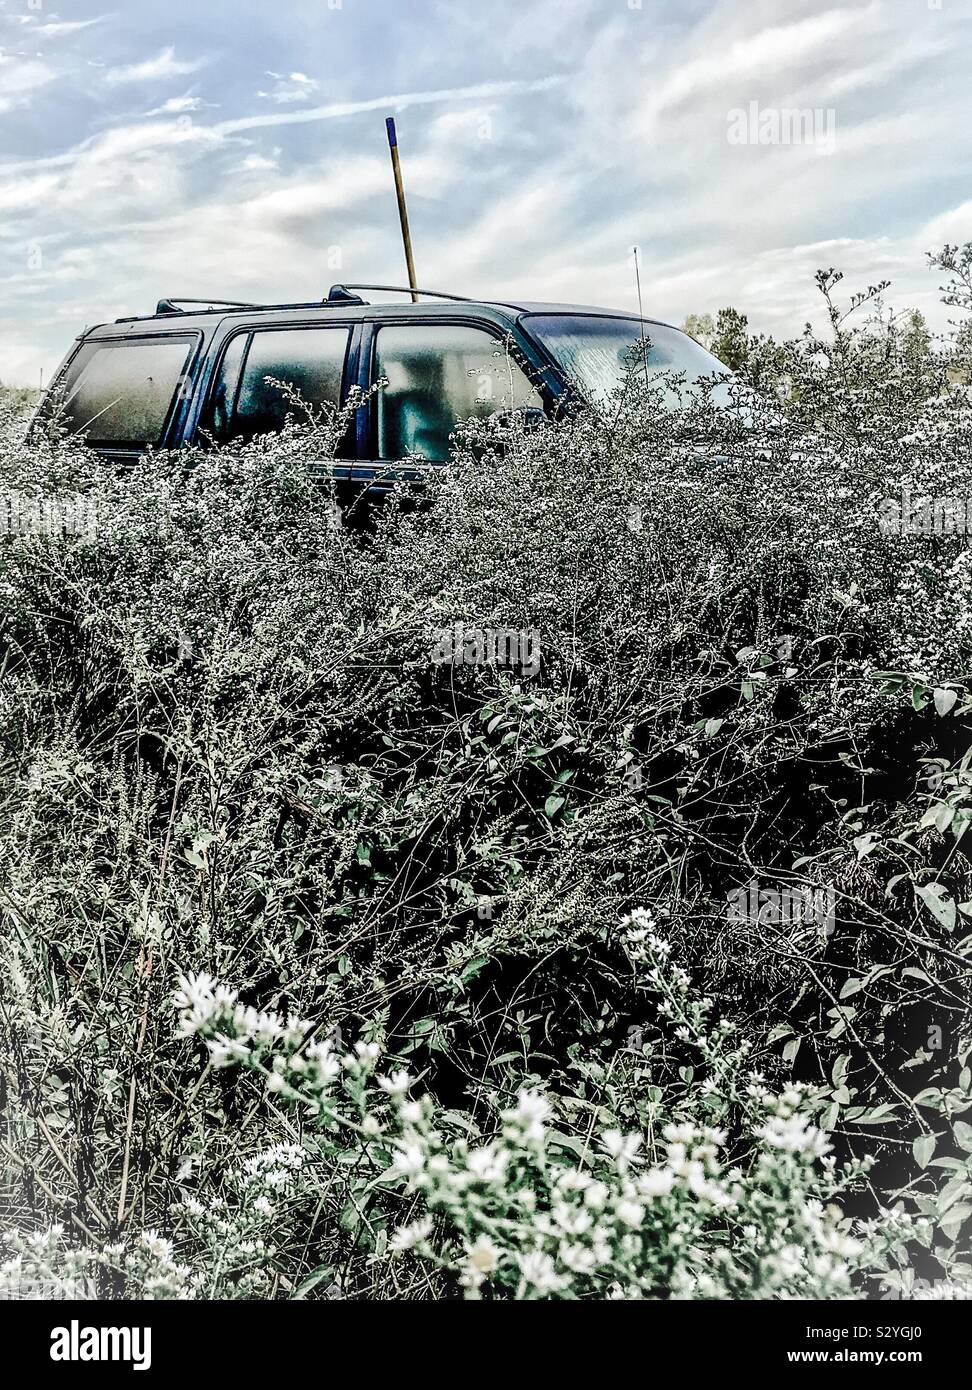 White Frost Astors encroach on parked SUV in North Carolina field Stock Photo